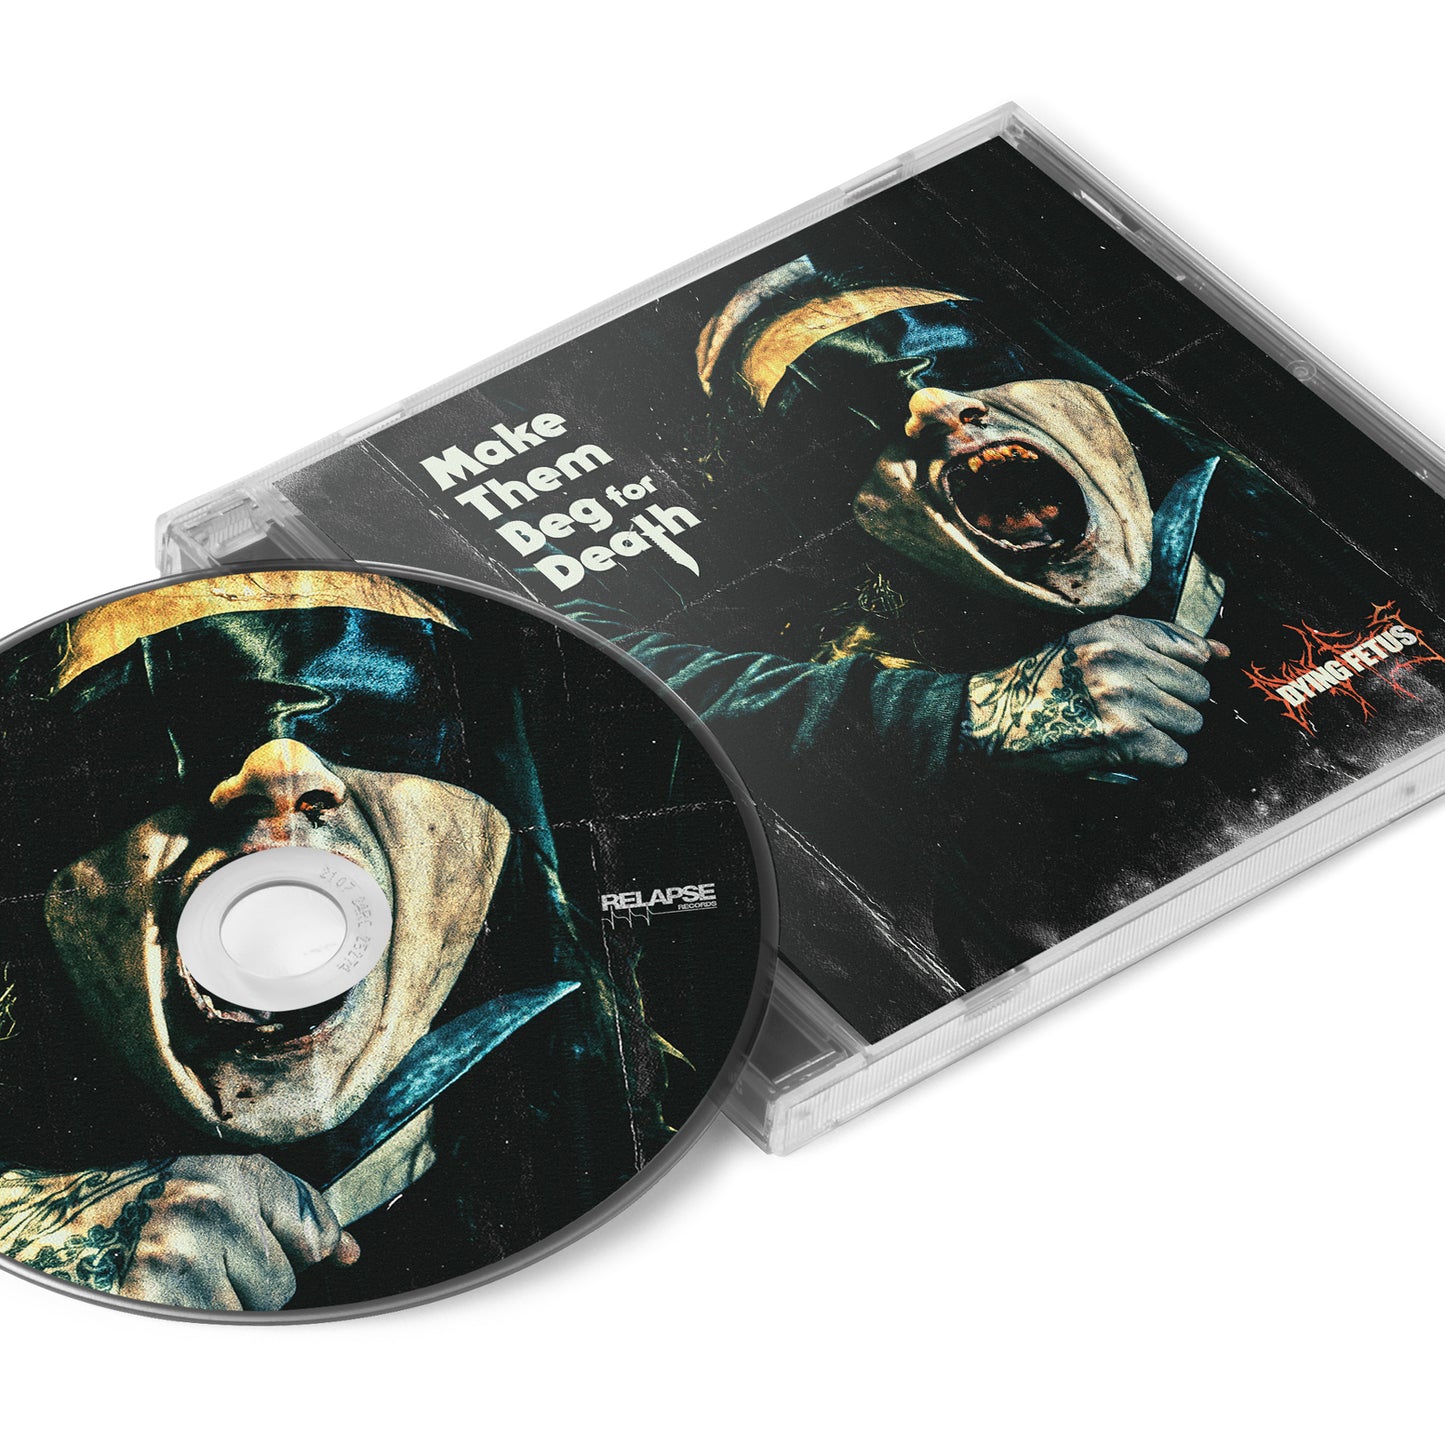 DYING FETUS - Make Them Beg For Death - CD-Box (pre-order)